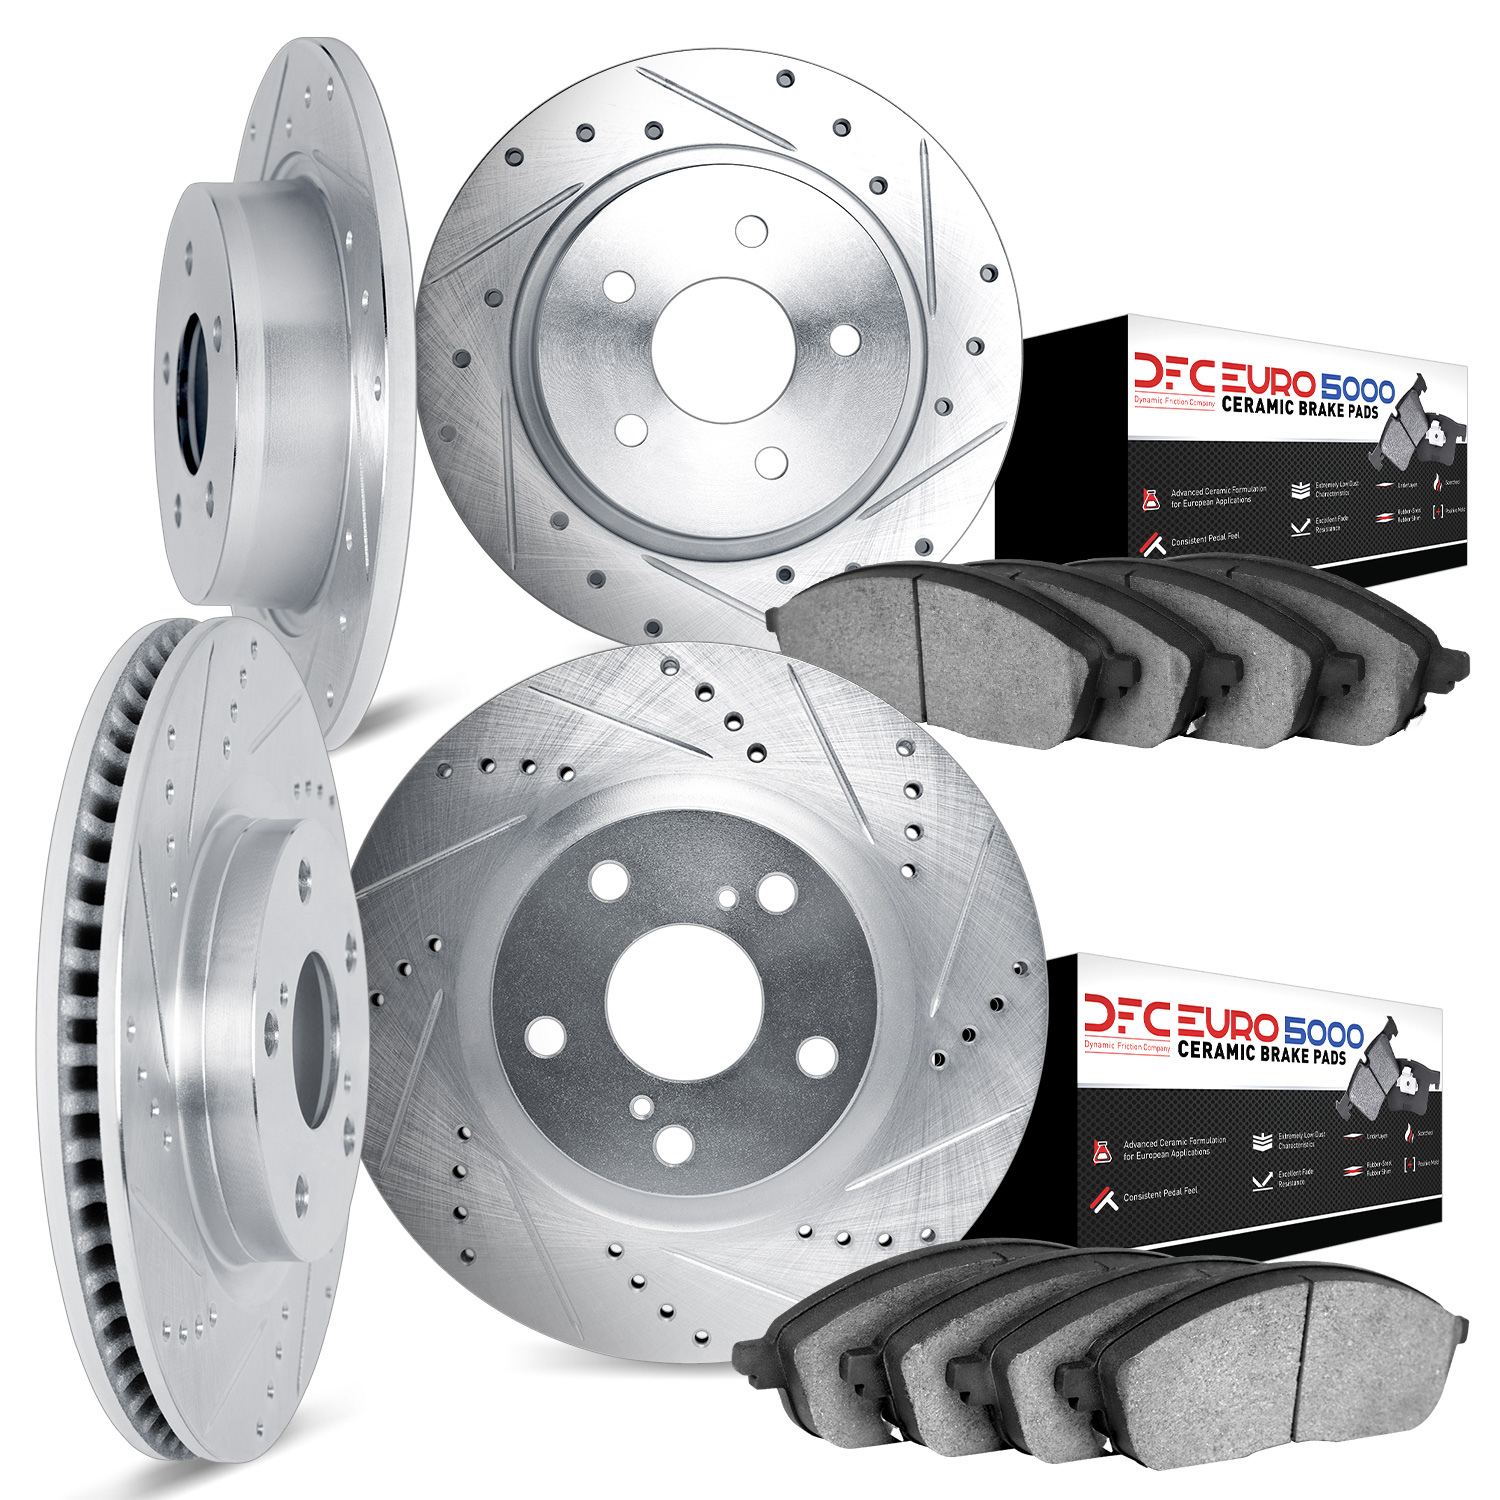 7604-20004 Drilled/Slotted Brake Rotors w/5000 Euro Ceramic Brake Pads Kit [Silver], 2003-2005 Jaguar, Position: Front and Rear